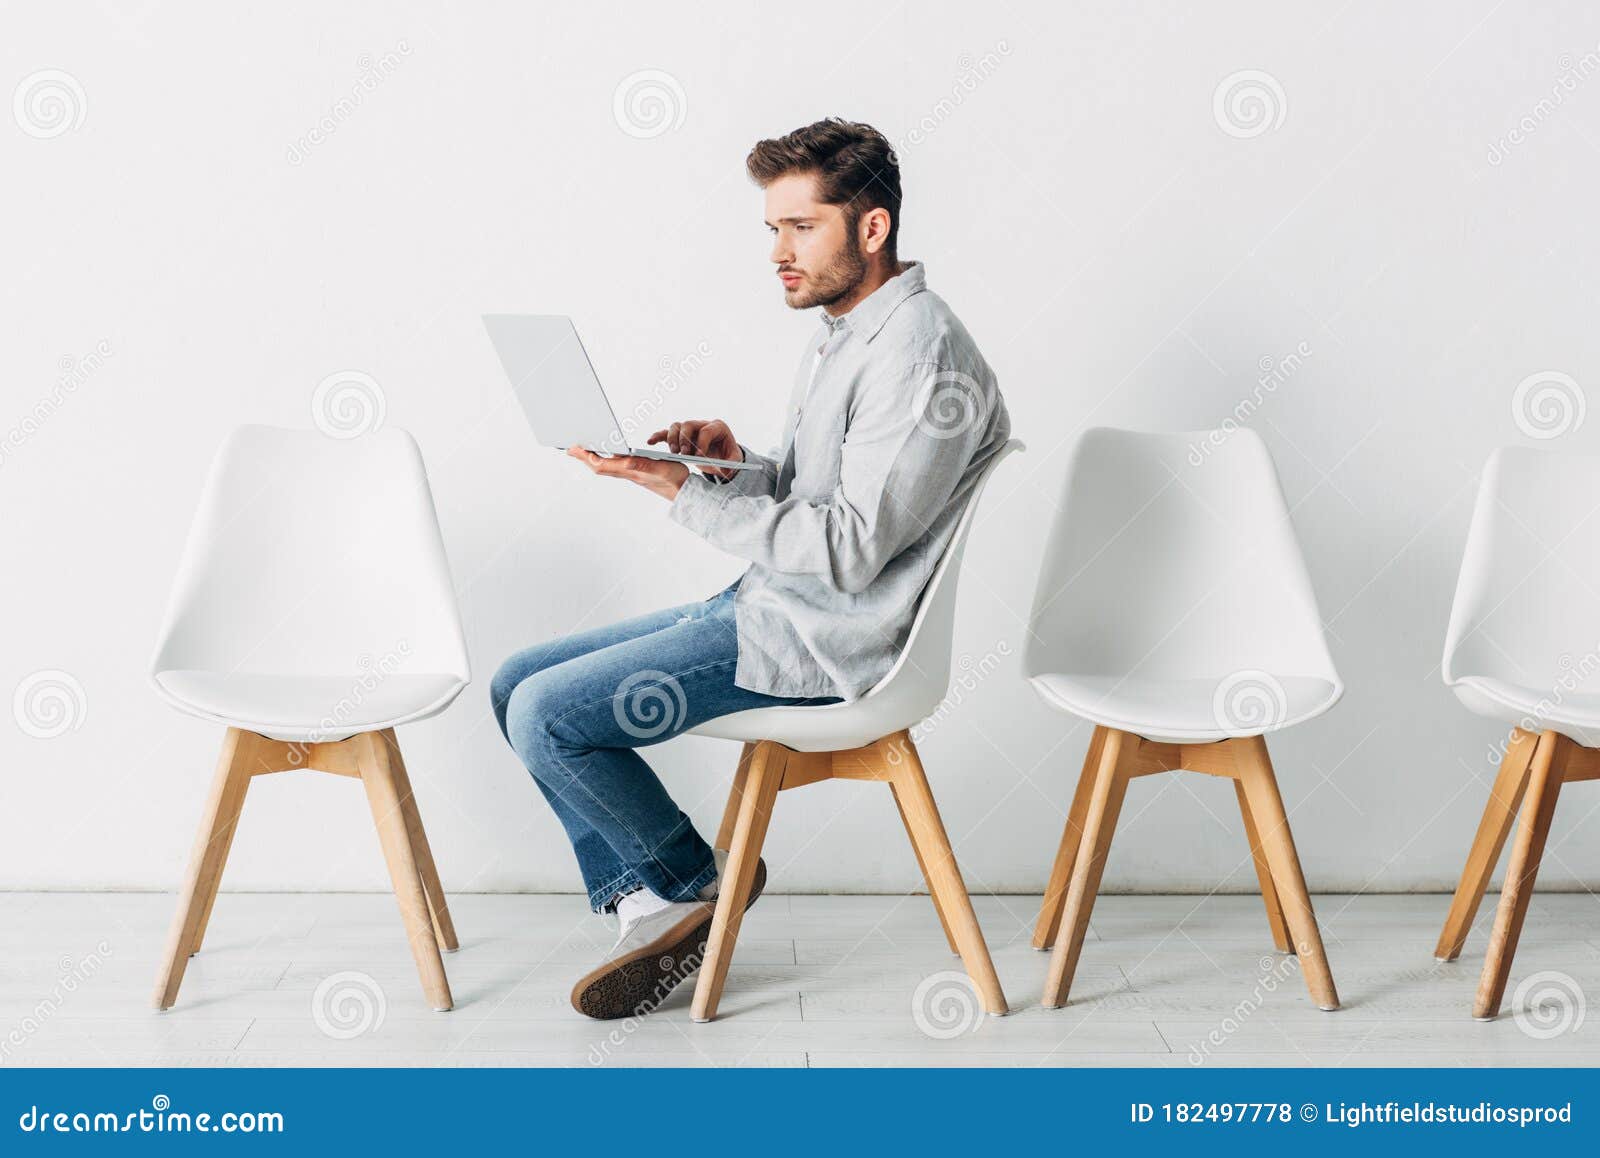 Side View of Employee Using Laptop on Chair Stock Photo - Image of ...